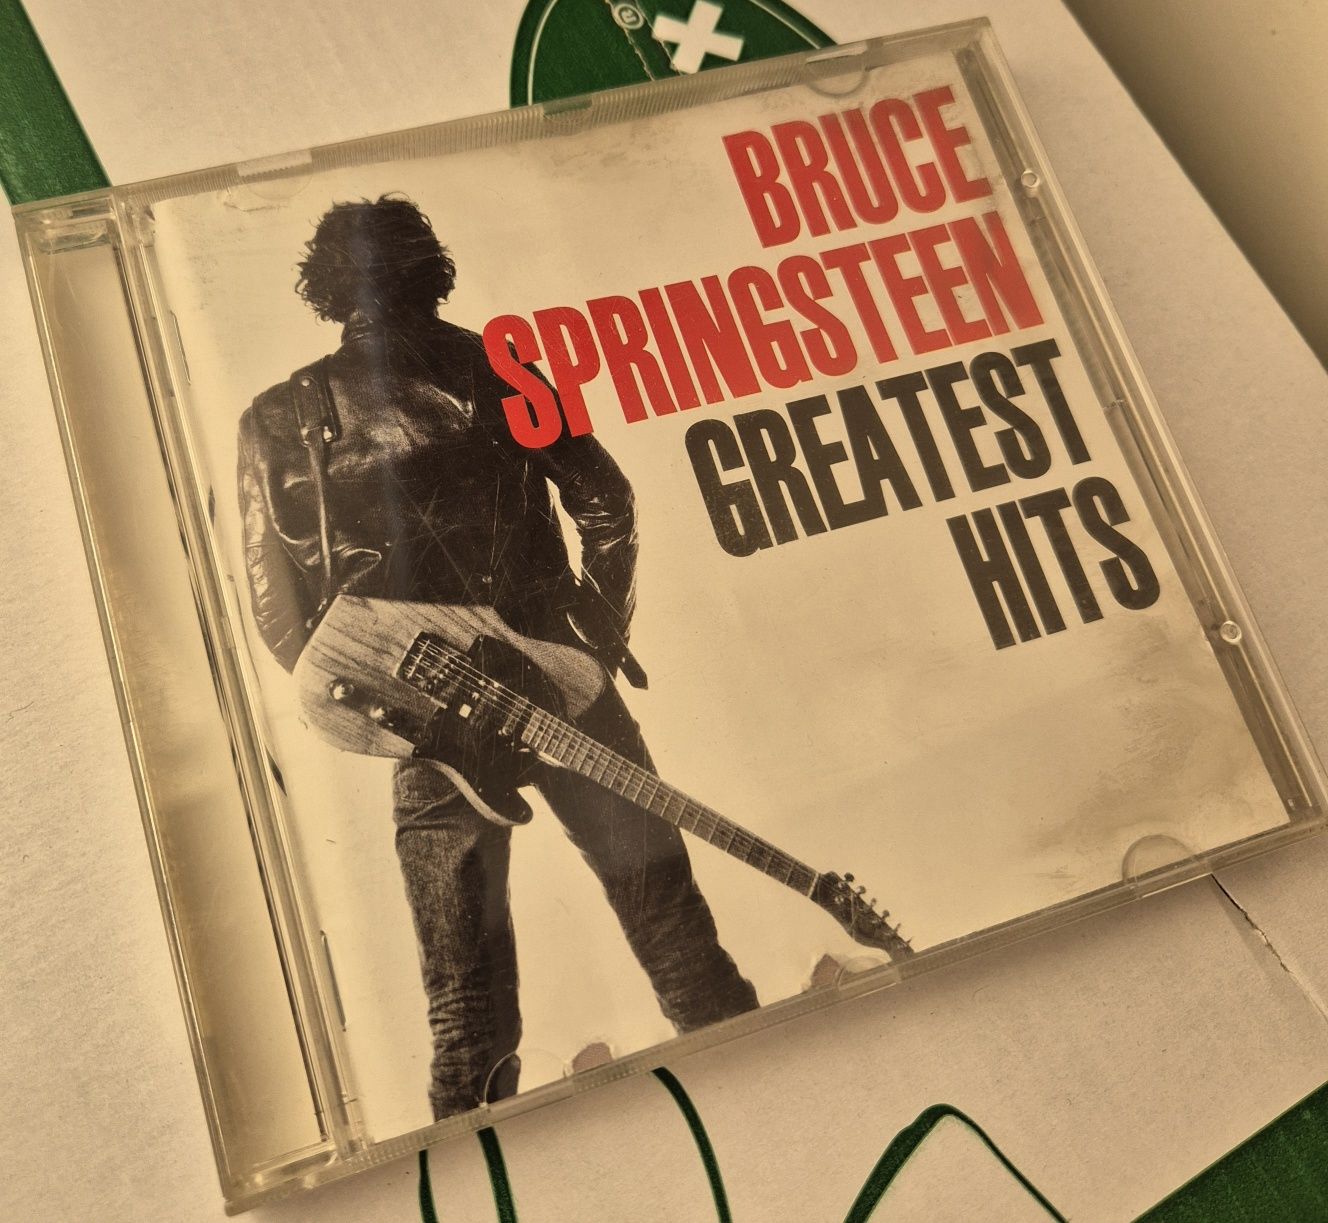 Bruce  Springsteen "greatest hits"